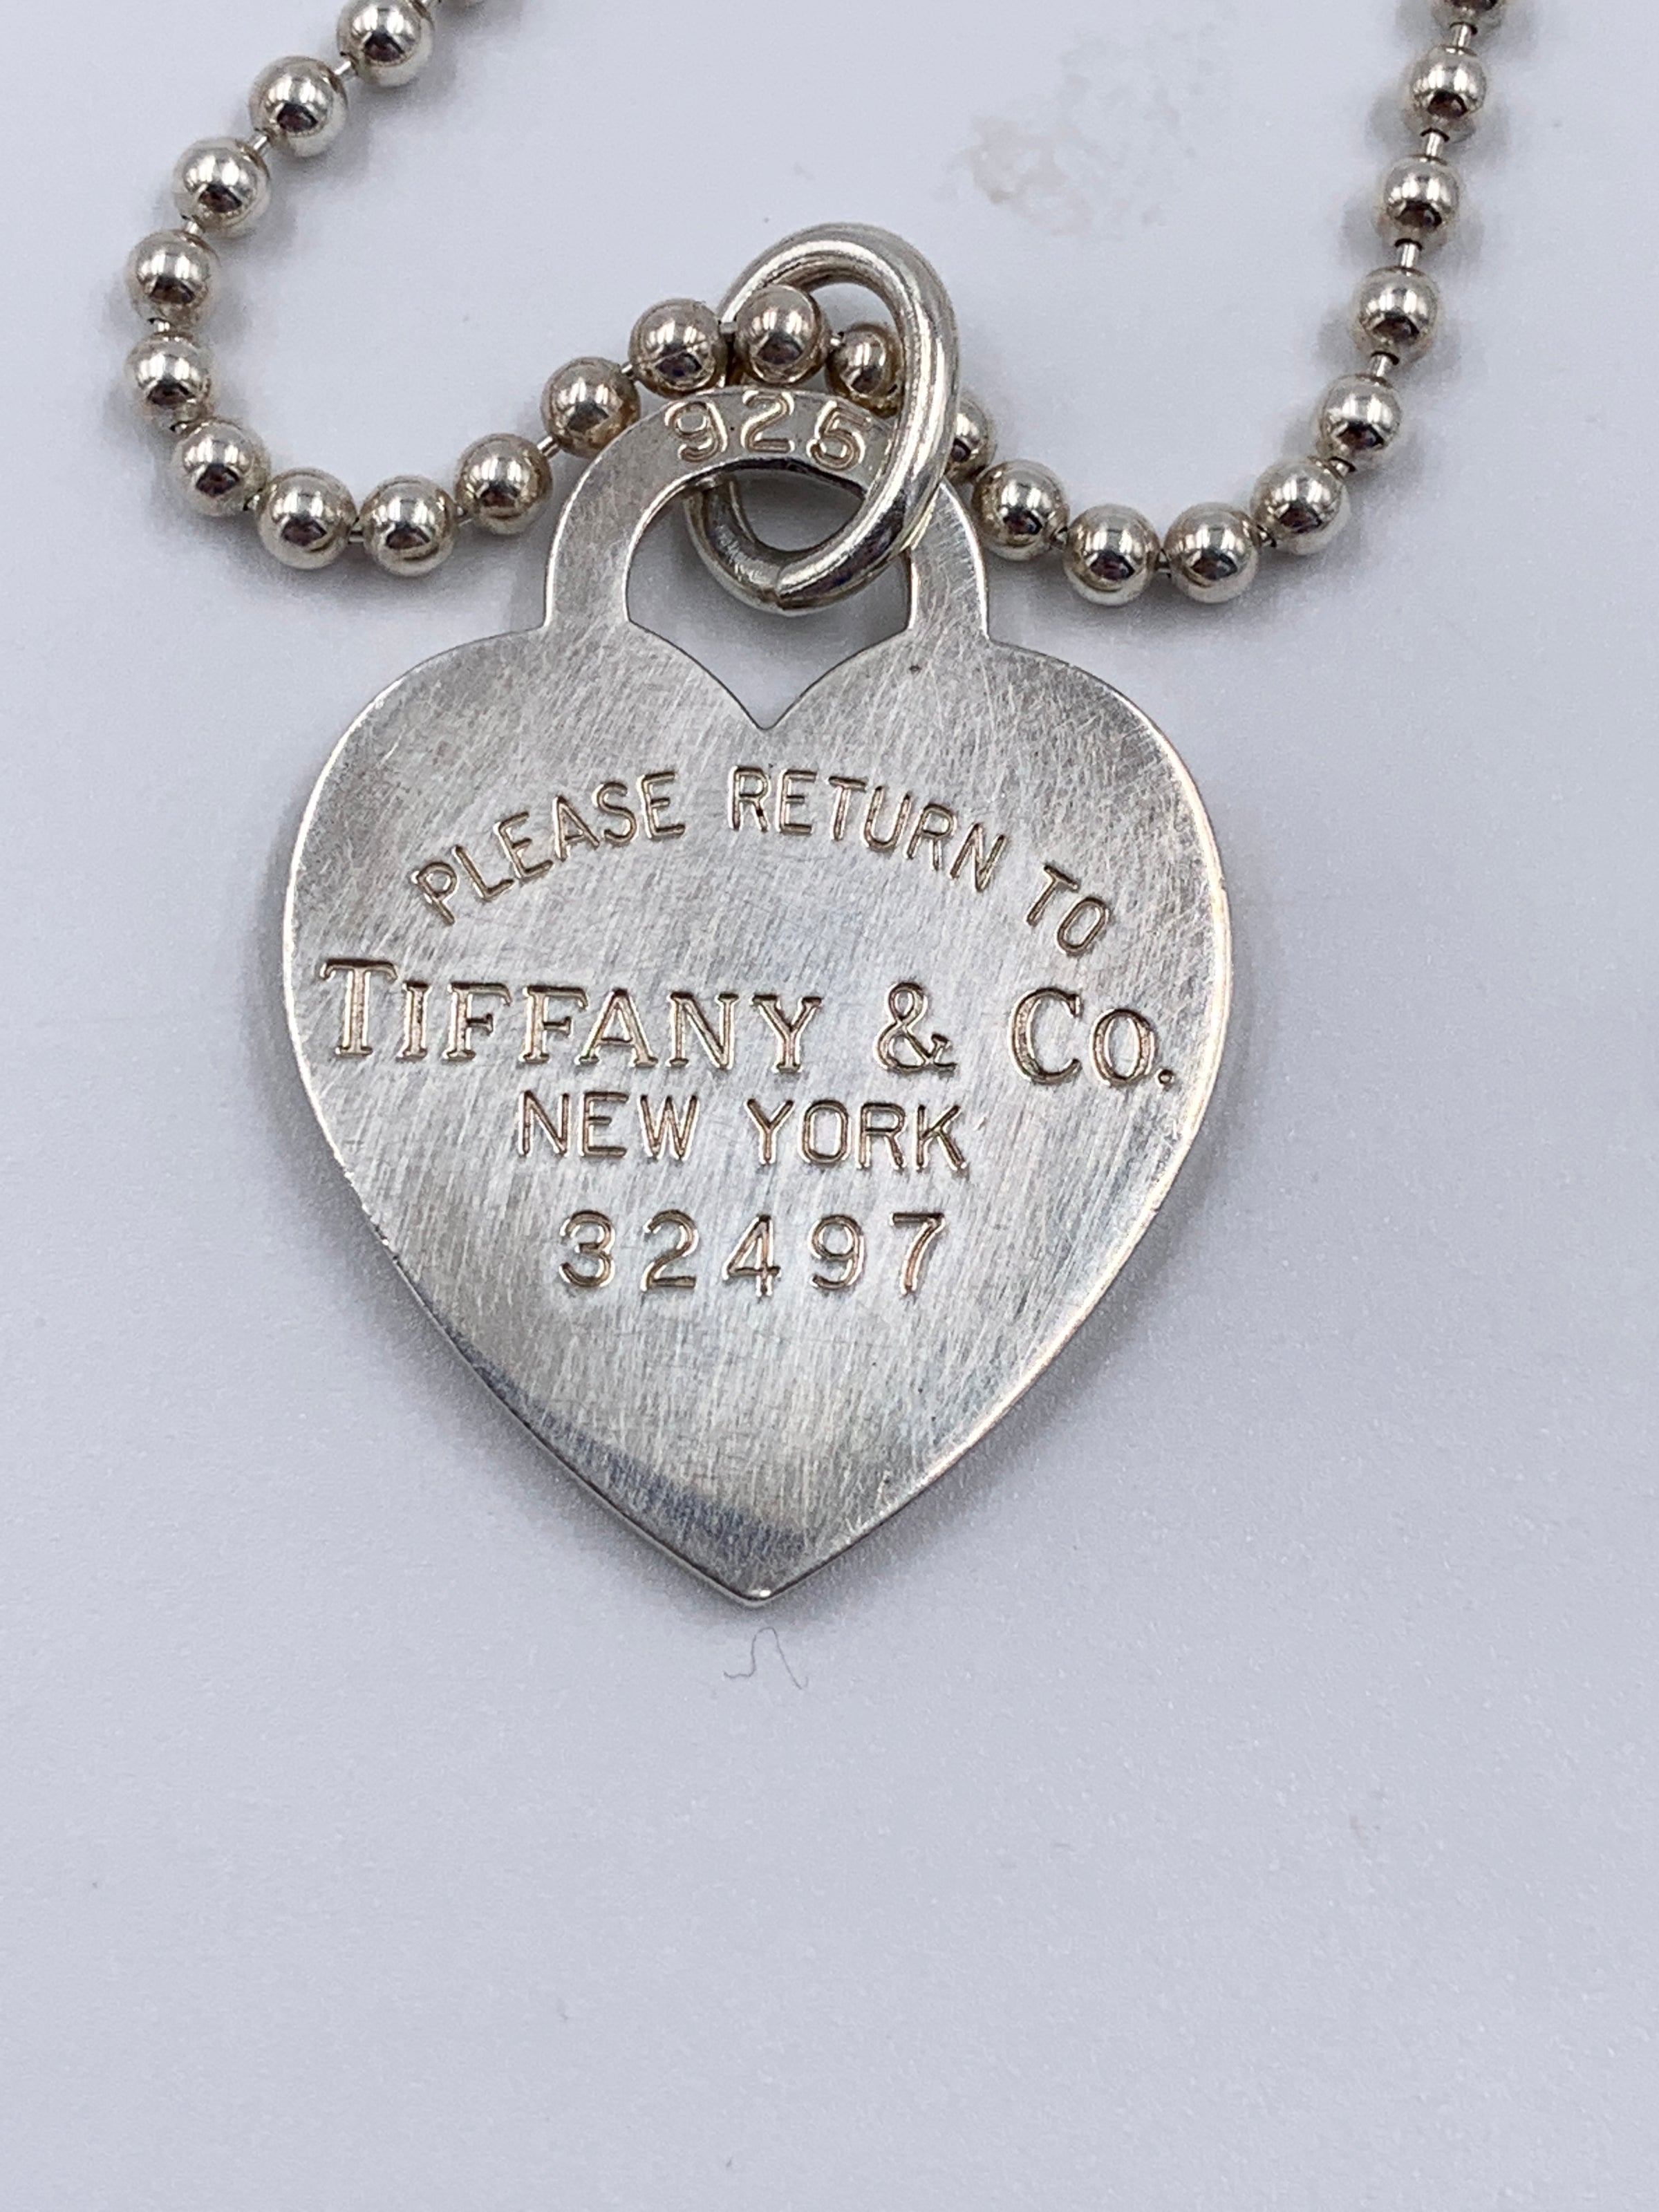 Tiffany & Co. Return to Tiffany Heart Tag Pendant Necklace Sterling Silver  - Chronostore